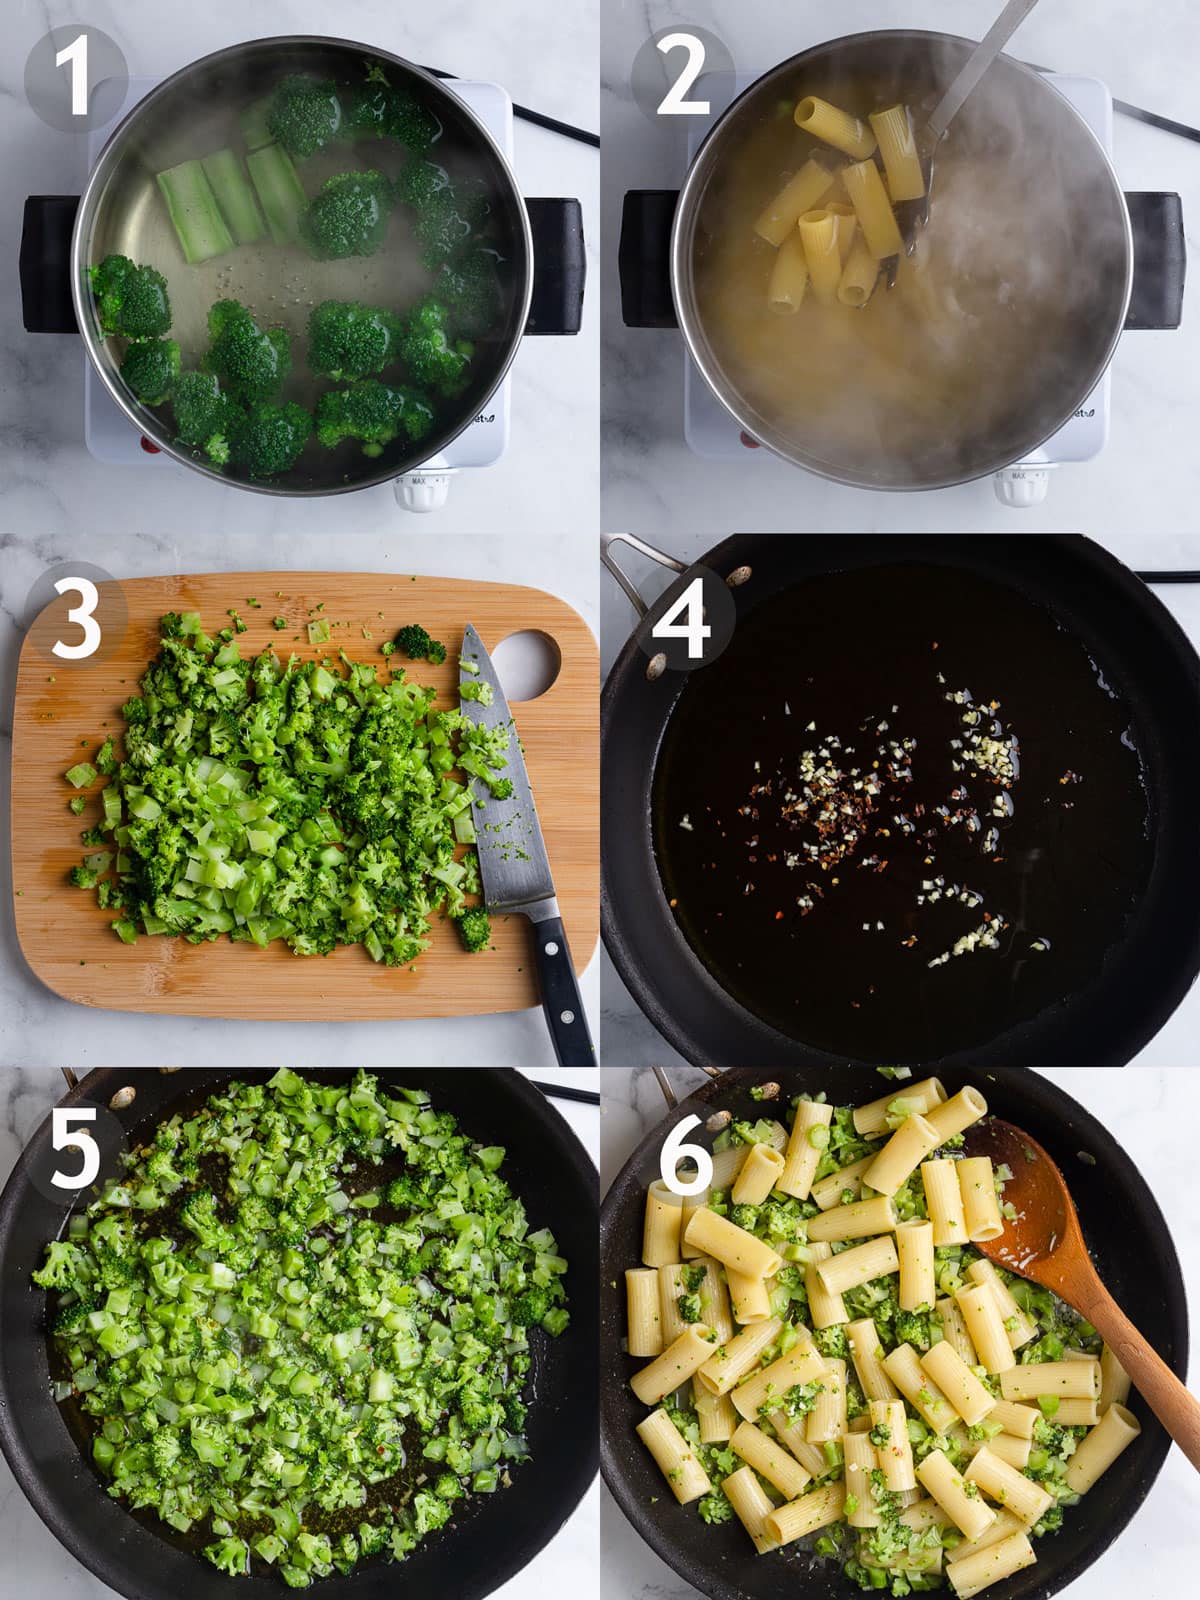 Steps to cook pasta including boiling and chopping broccoli, boiling rigatoni, sautéing onion and red pepper, and adding broccoli, pasta and grated cheese.